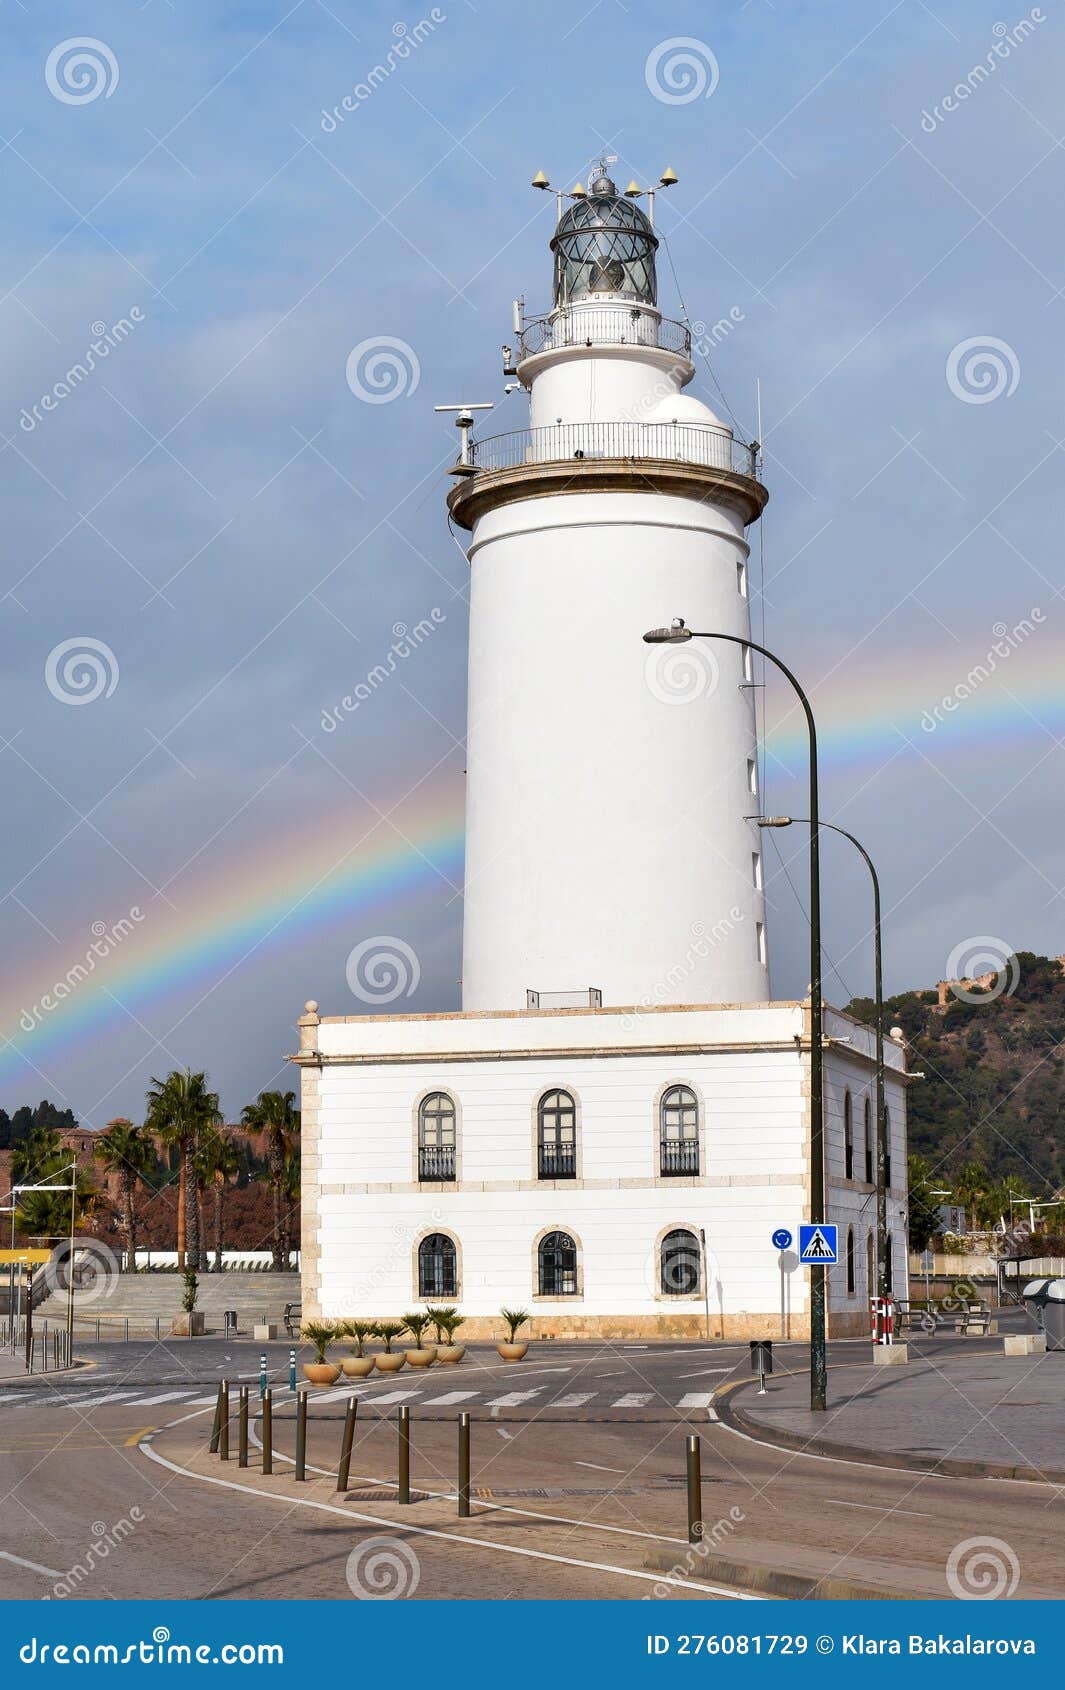 la farola lighthouse in malaga, an old coastal building in the harbour, with a rainbow in the background, spain